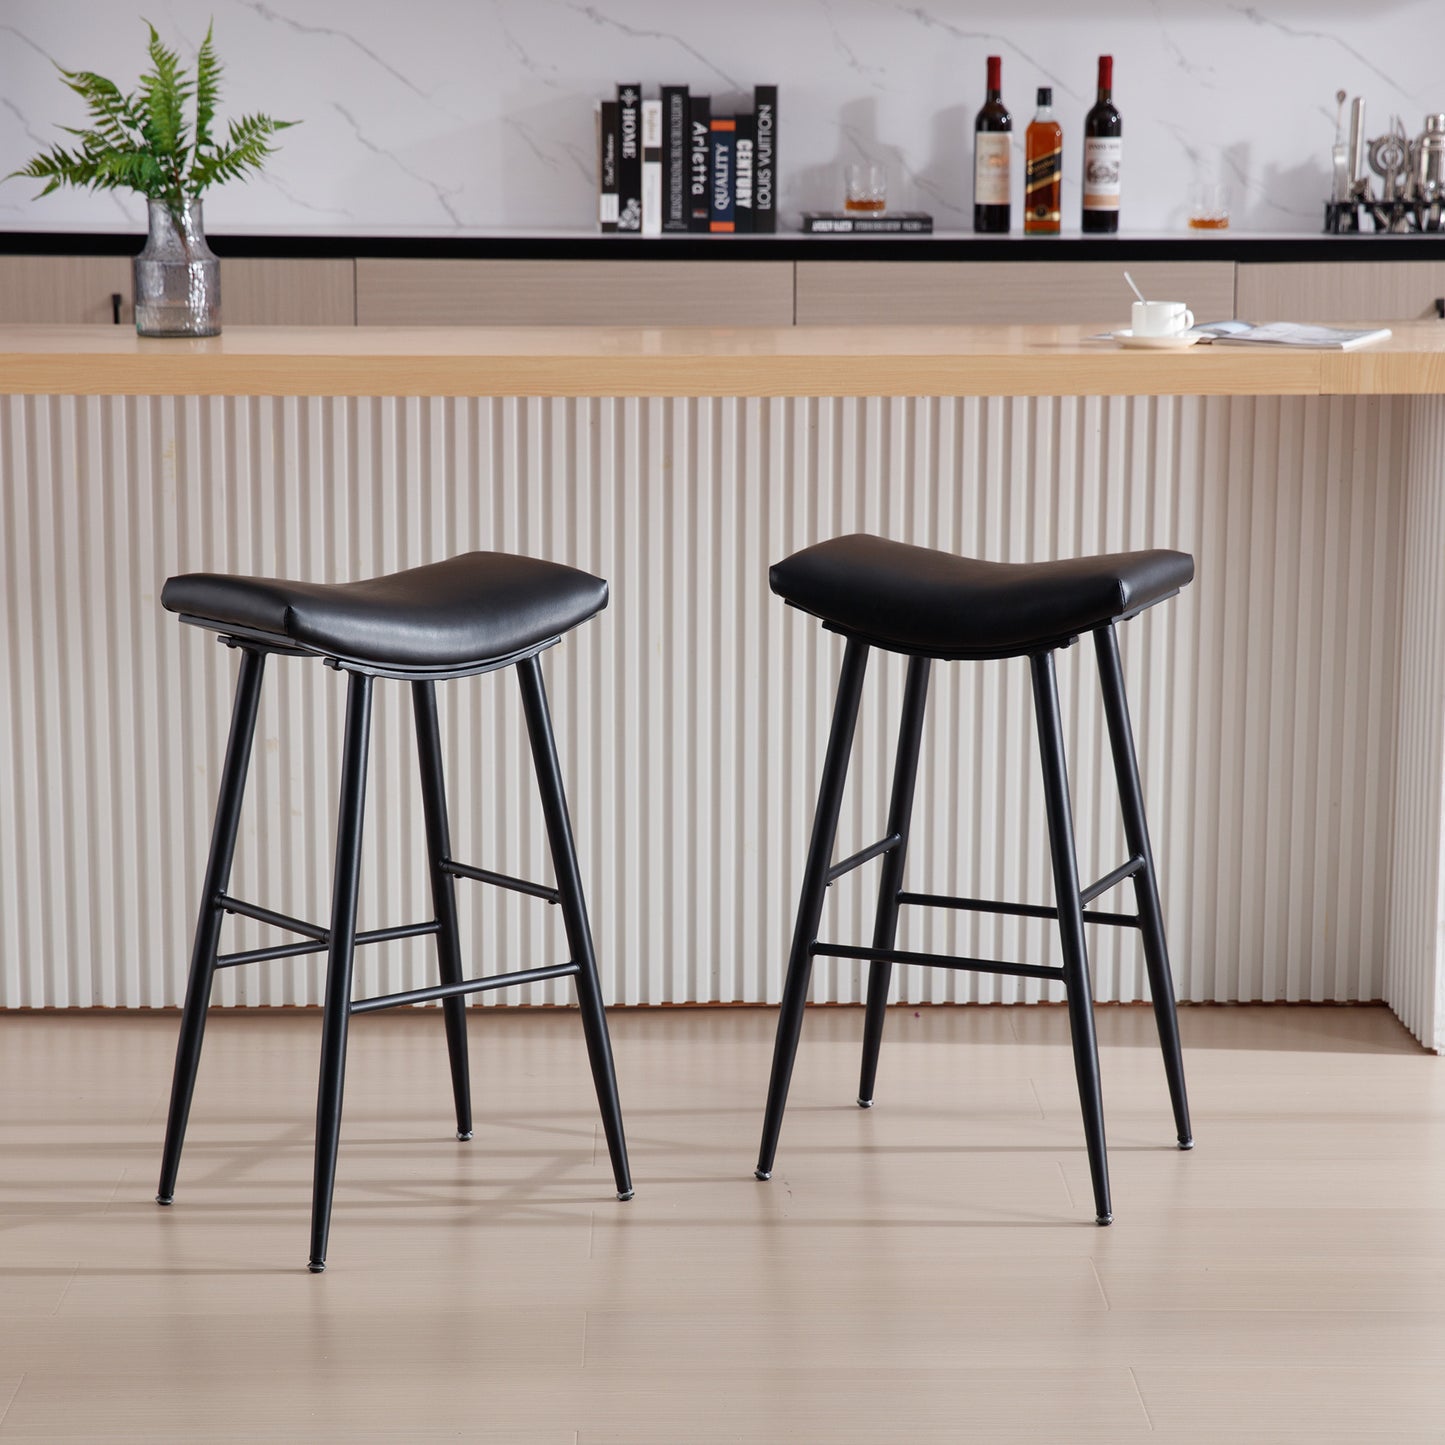 Counter Height Bar Stool Set of 2 for Dining Room Kitchen Counter Island, PU Upholstered Breakfast Stools With Footrest,Black - Enova Luxe Home Store